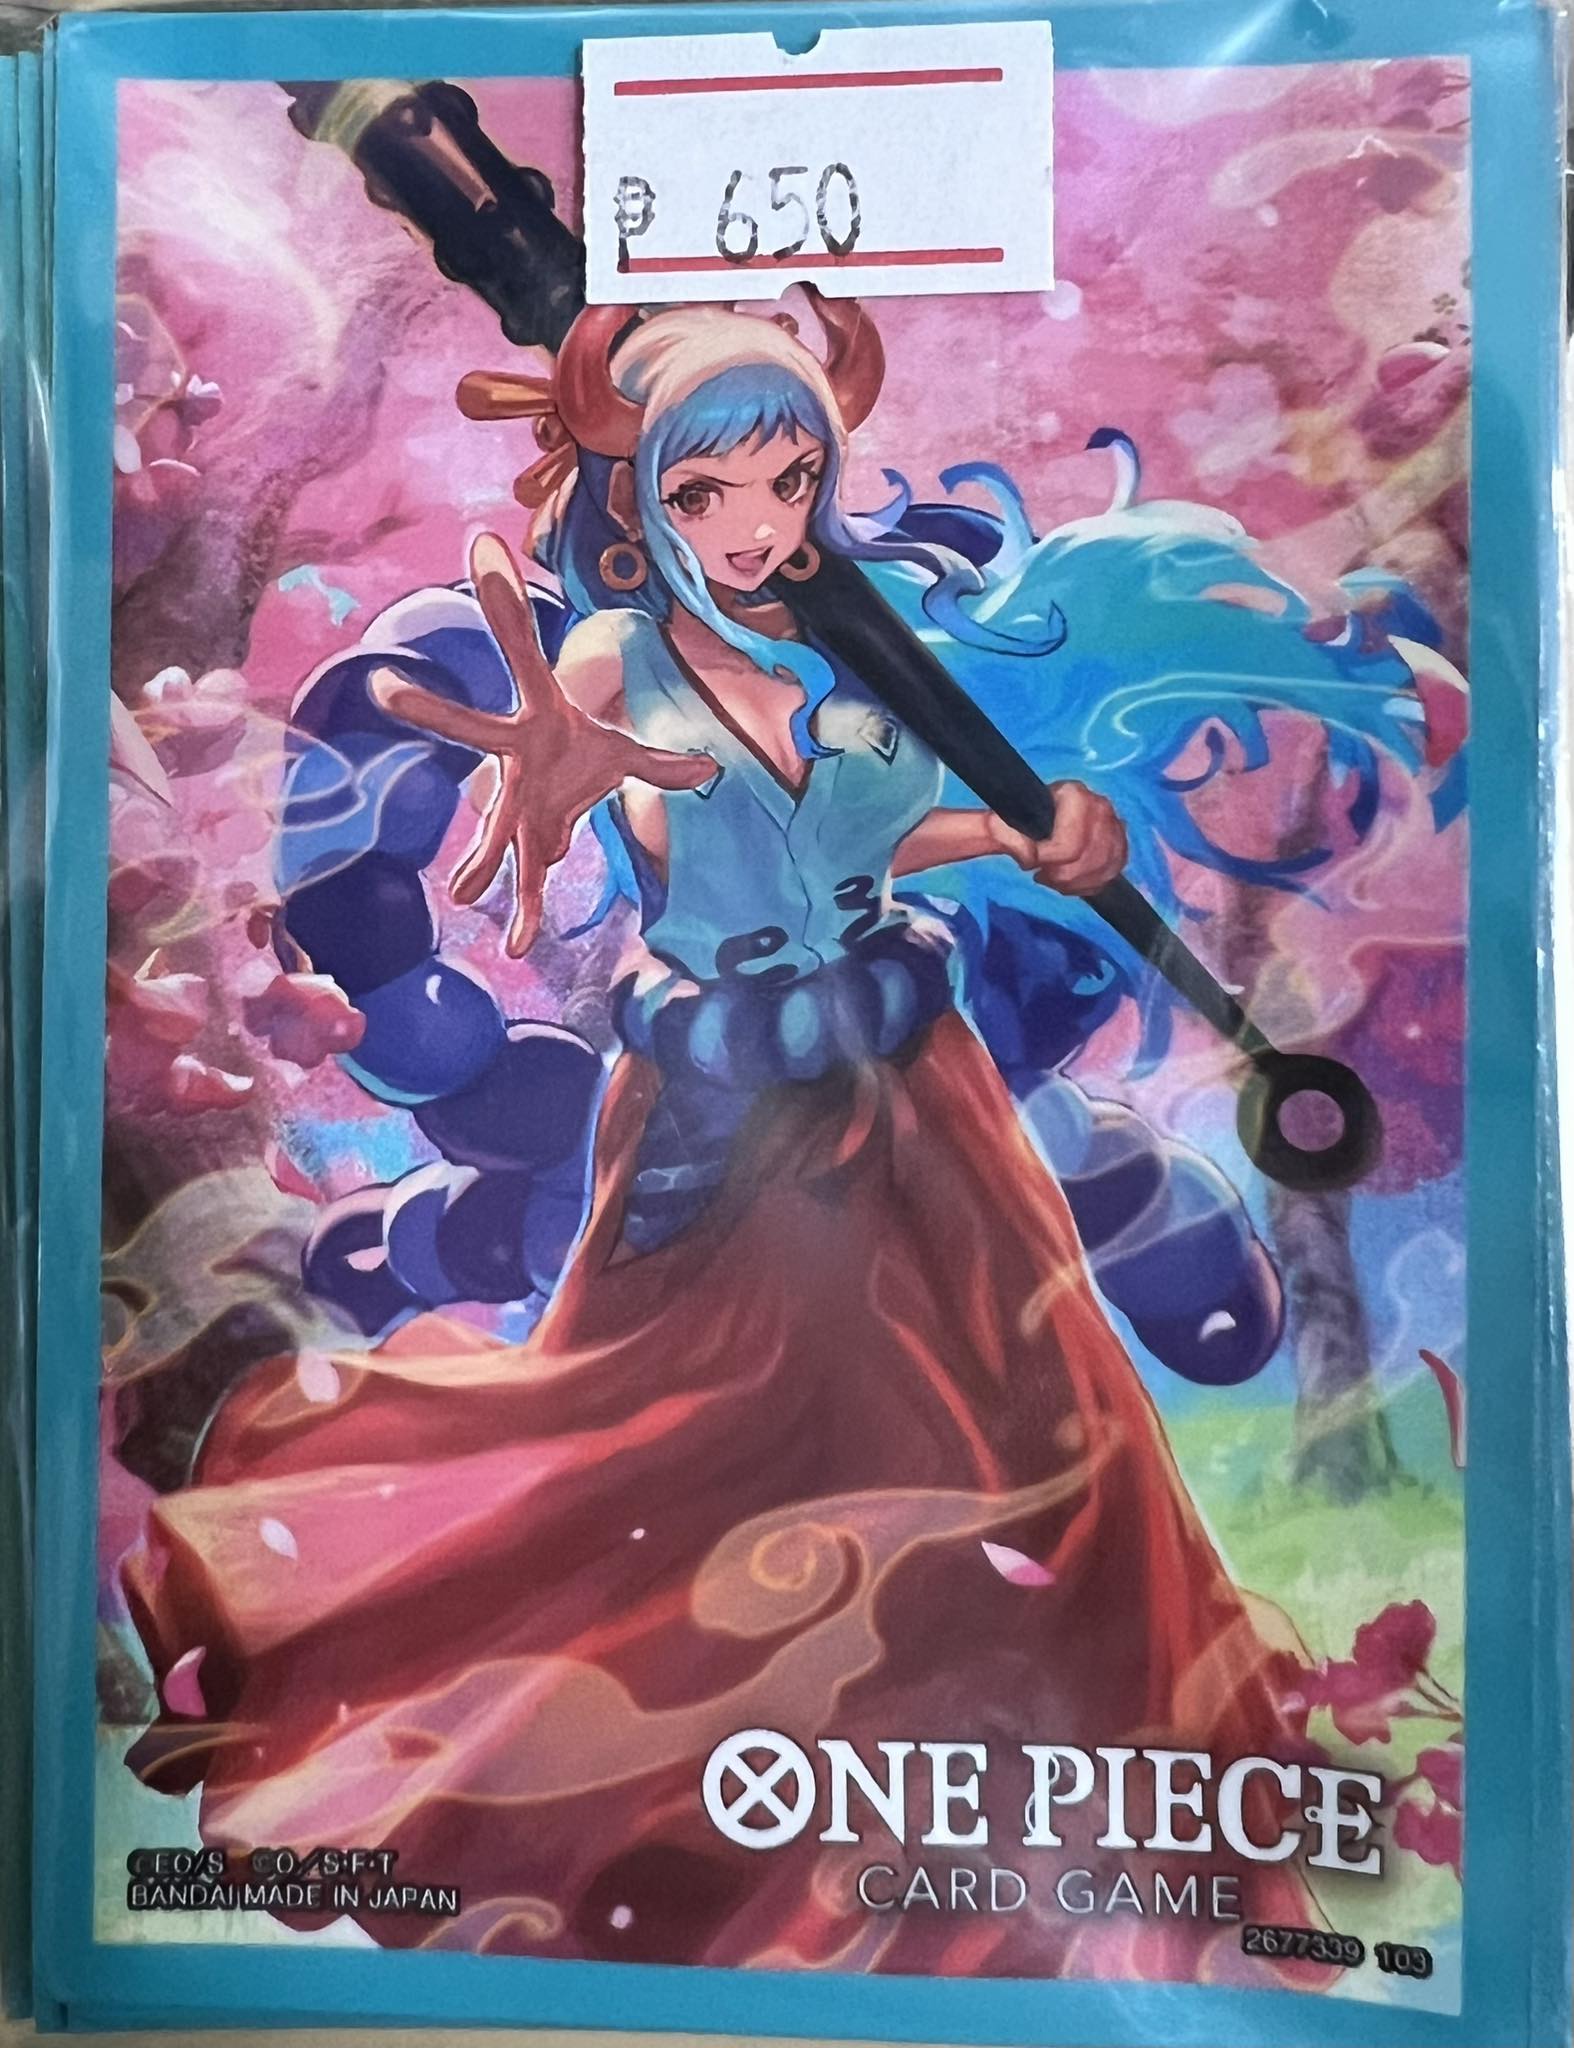 One Piece Card Game Sleeves 70ct – Yamato